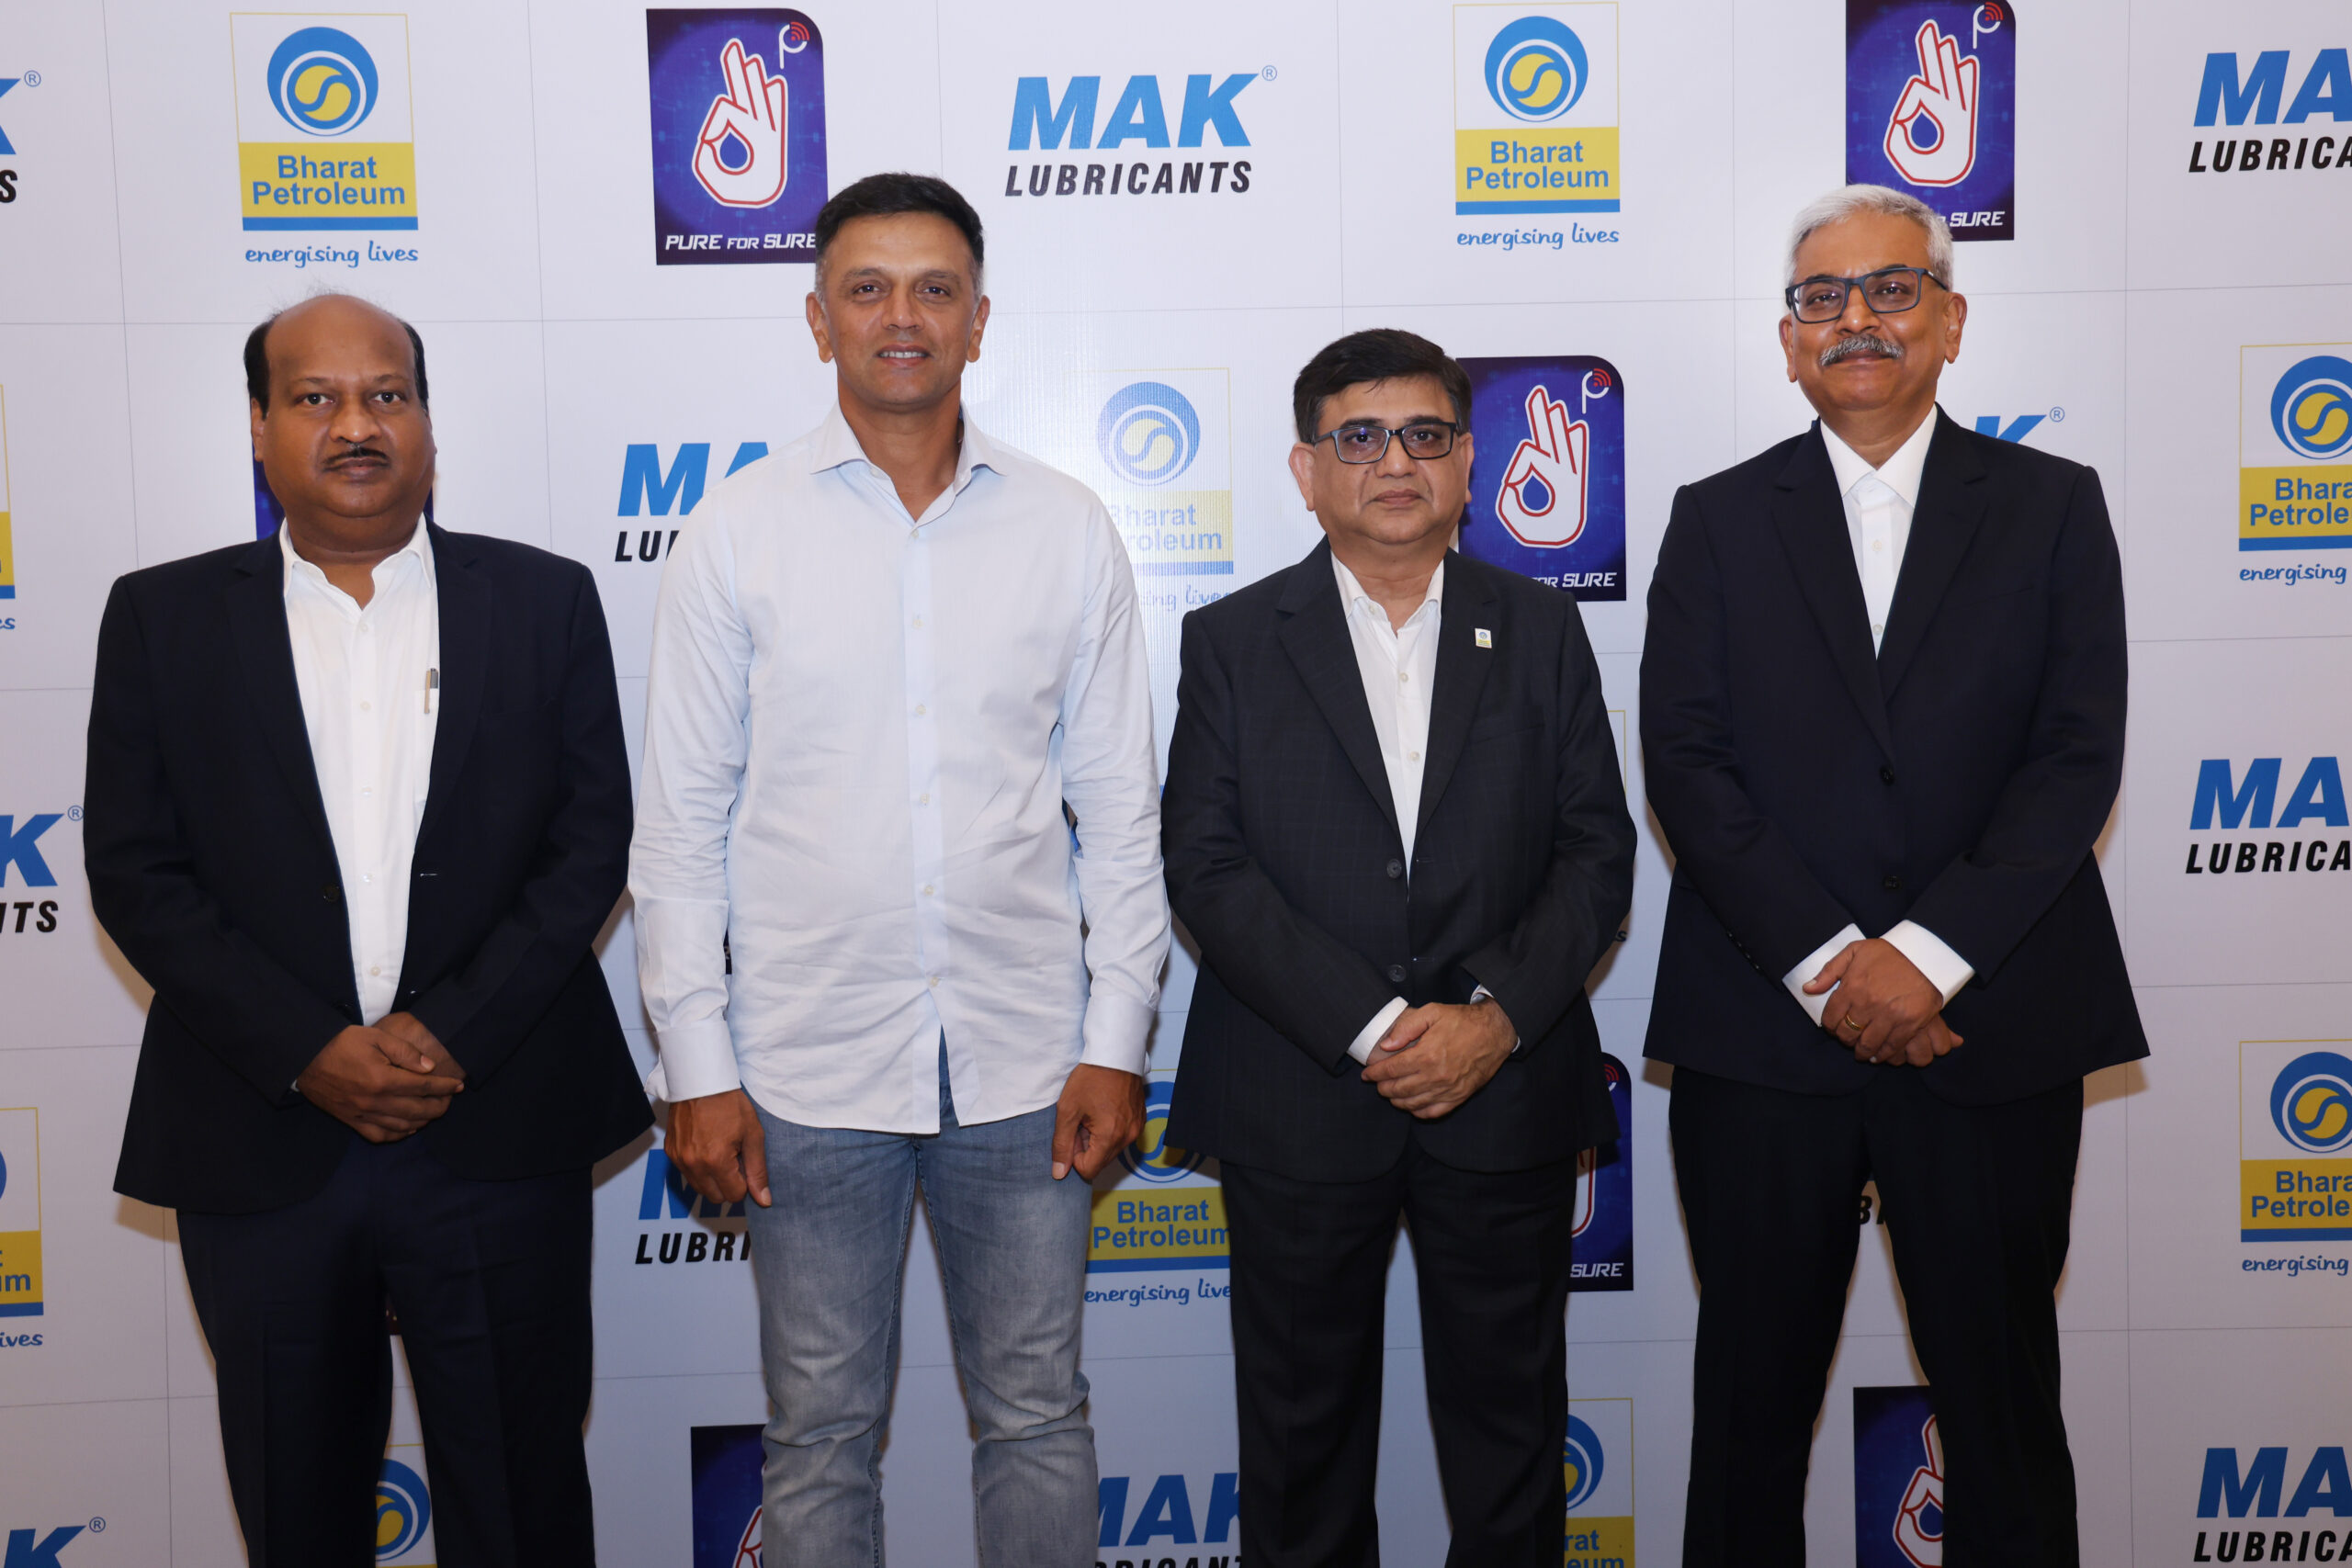 Rahul Dravid will endorse BPCL's iconic Pure for Sure initiative and range of MAK lubricants. 